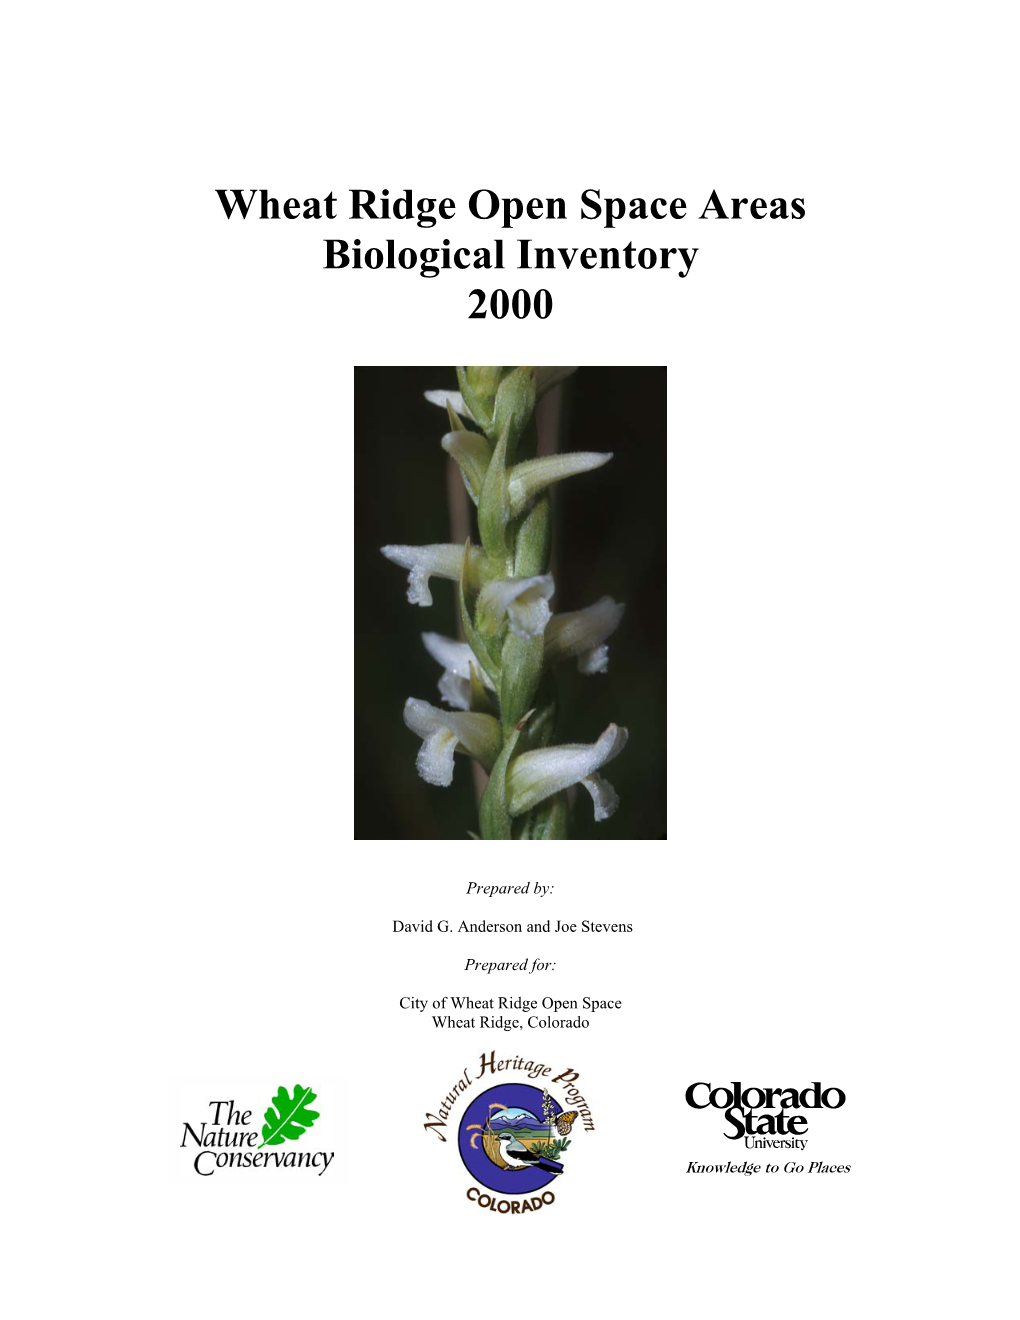 Wheat Ridge Open Space Areas Biological Inventory 2000